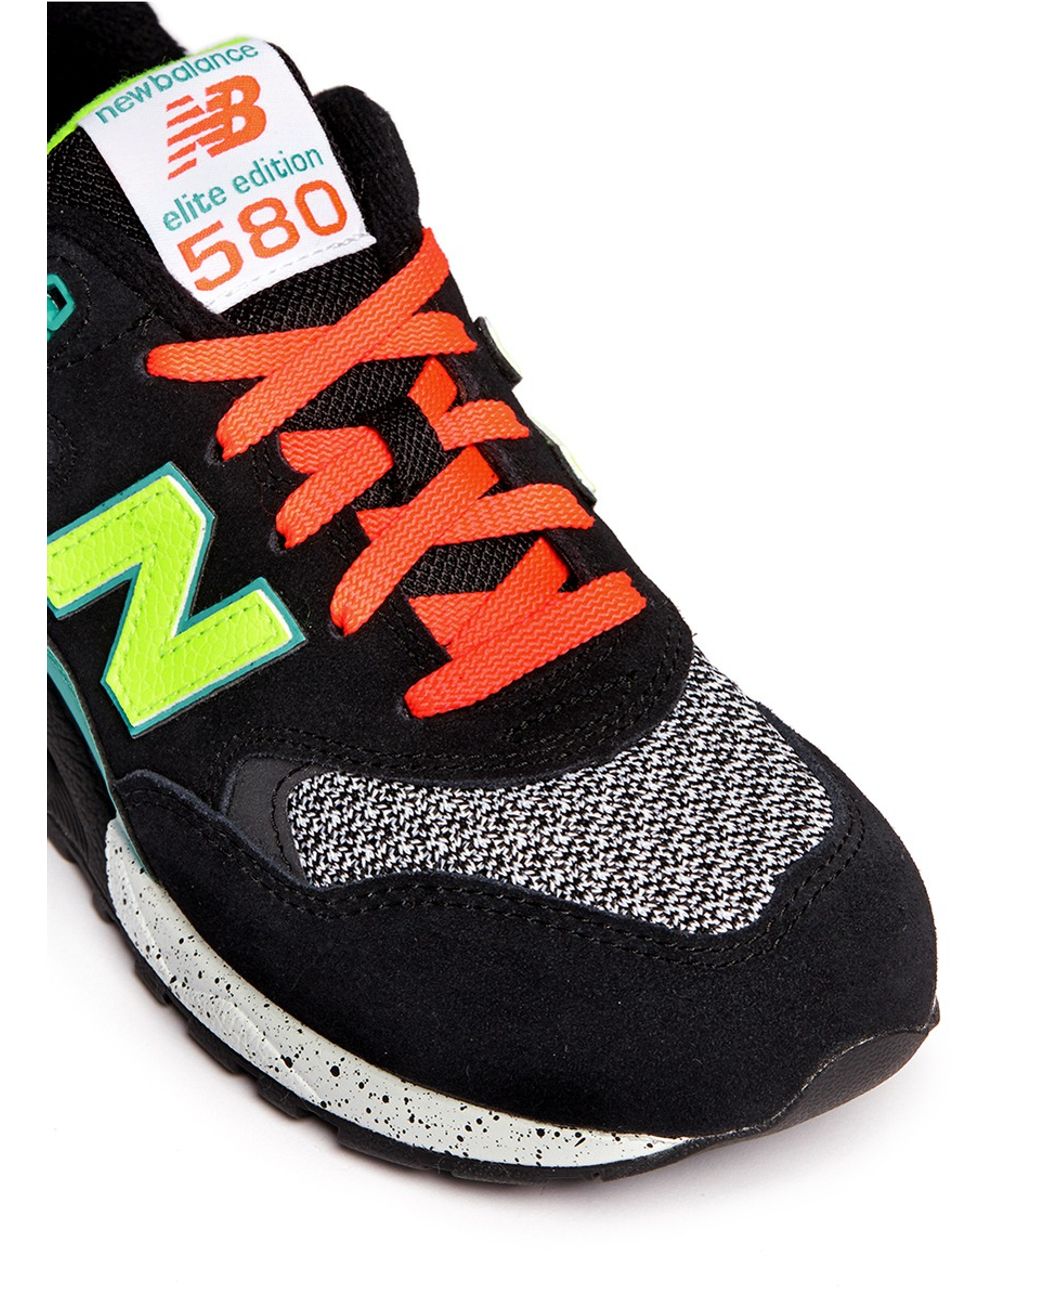 New Balance '580 Elite Edition' Mesh Suede Sneakers | Lyst